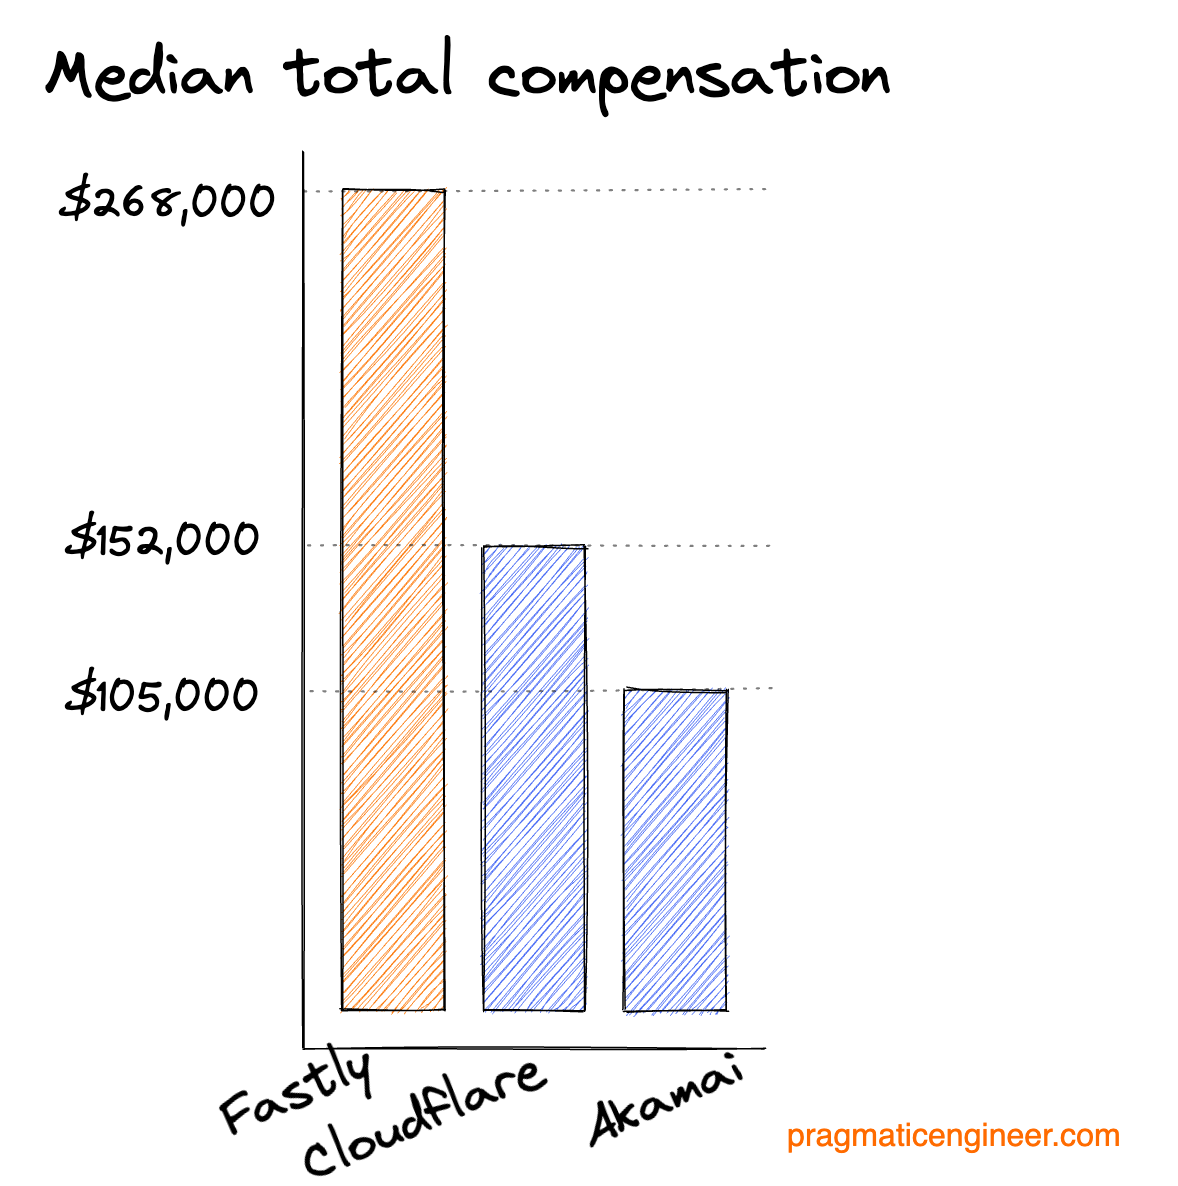 Median total compensation between the three CDN providers